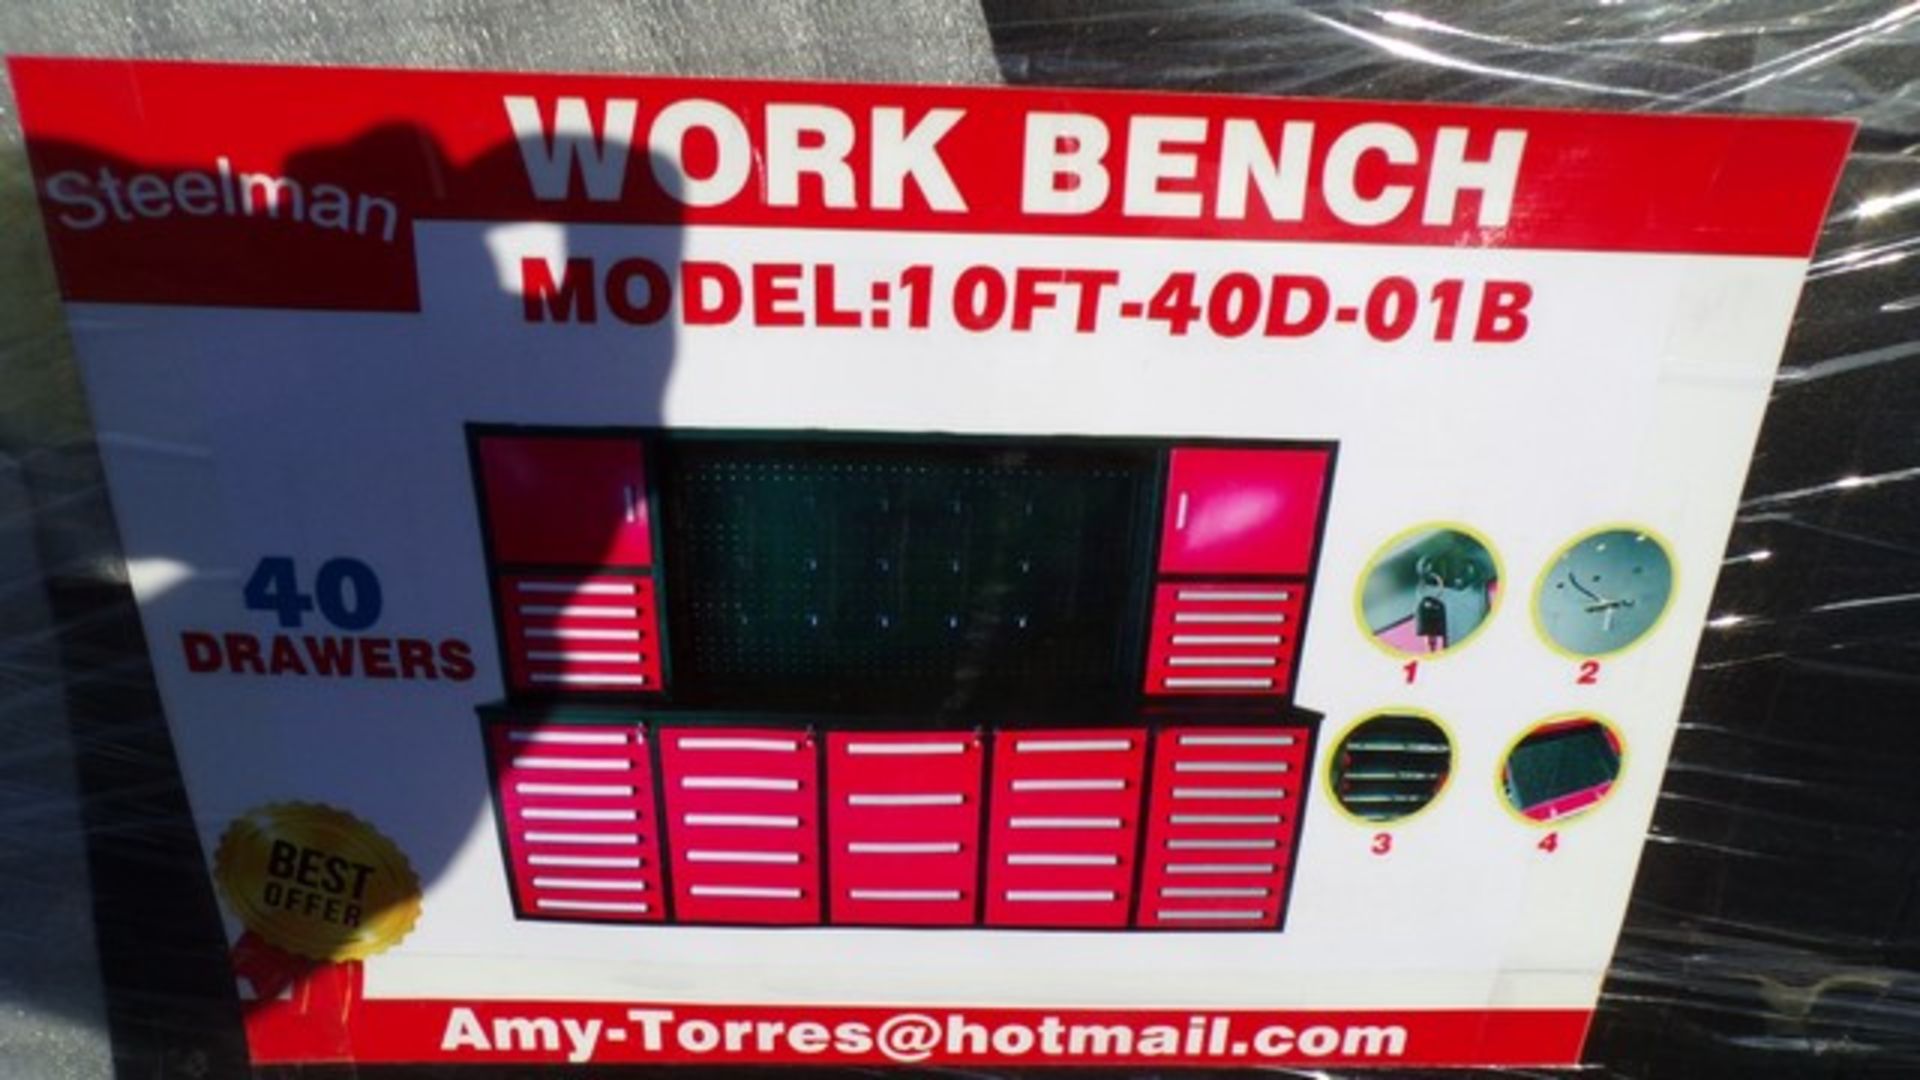 Located in YARD 1 - Midland, TX NEW STEELMAN 10' WORK BENCH W/ 40 DRAWERS - Image 2 of 2